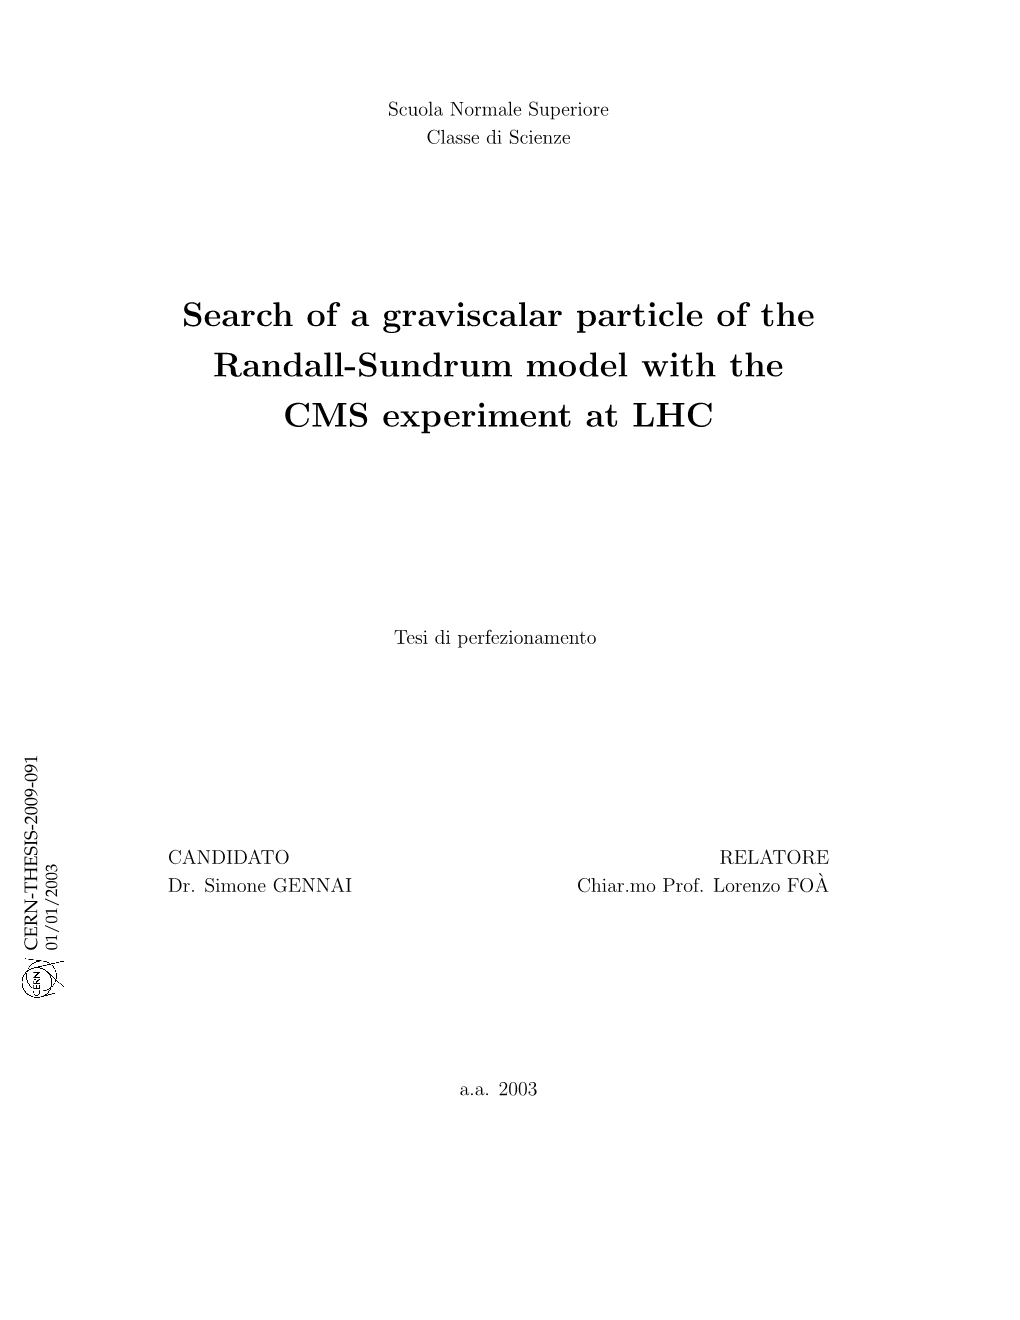 Search of a Graviscalar Particle of the Randall